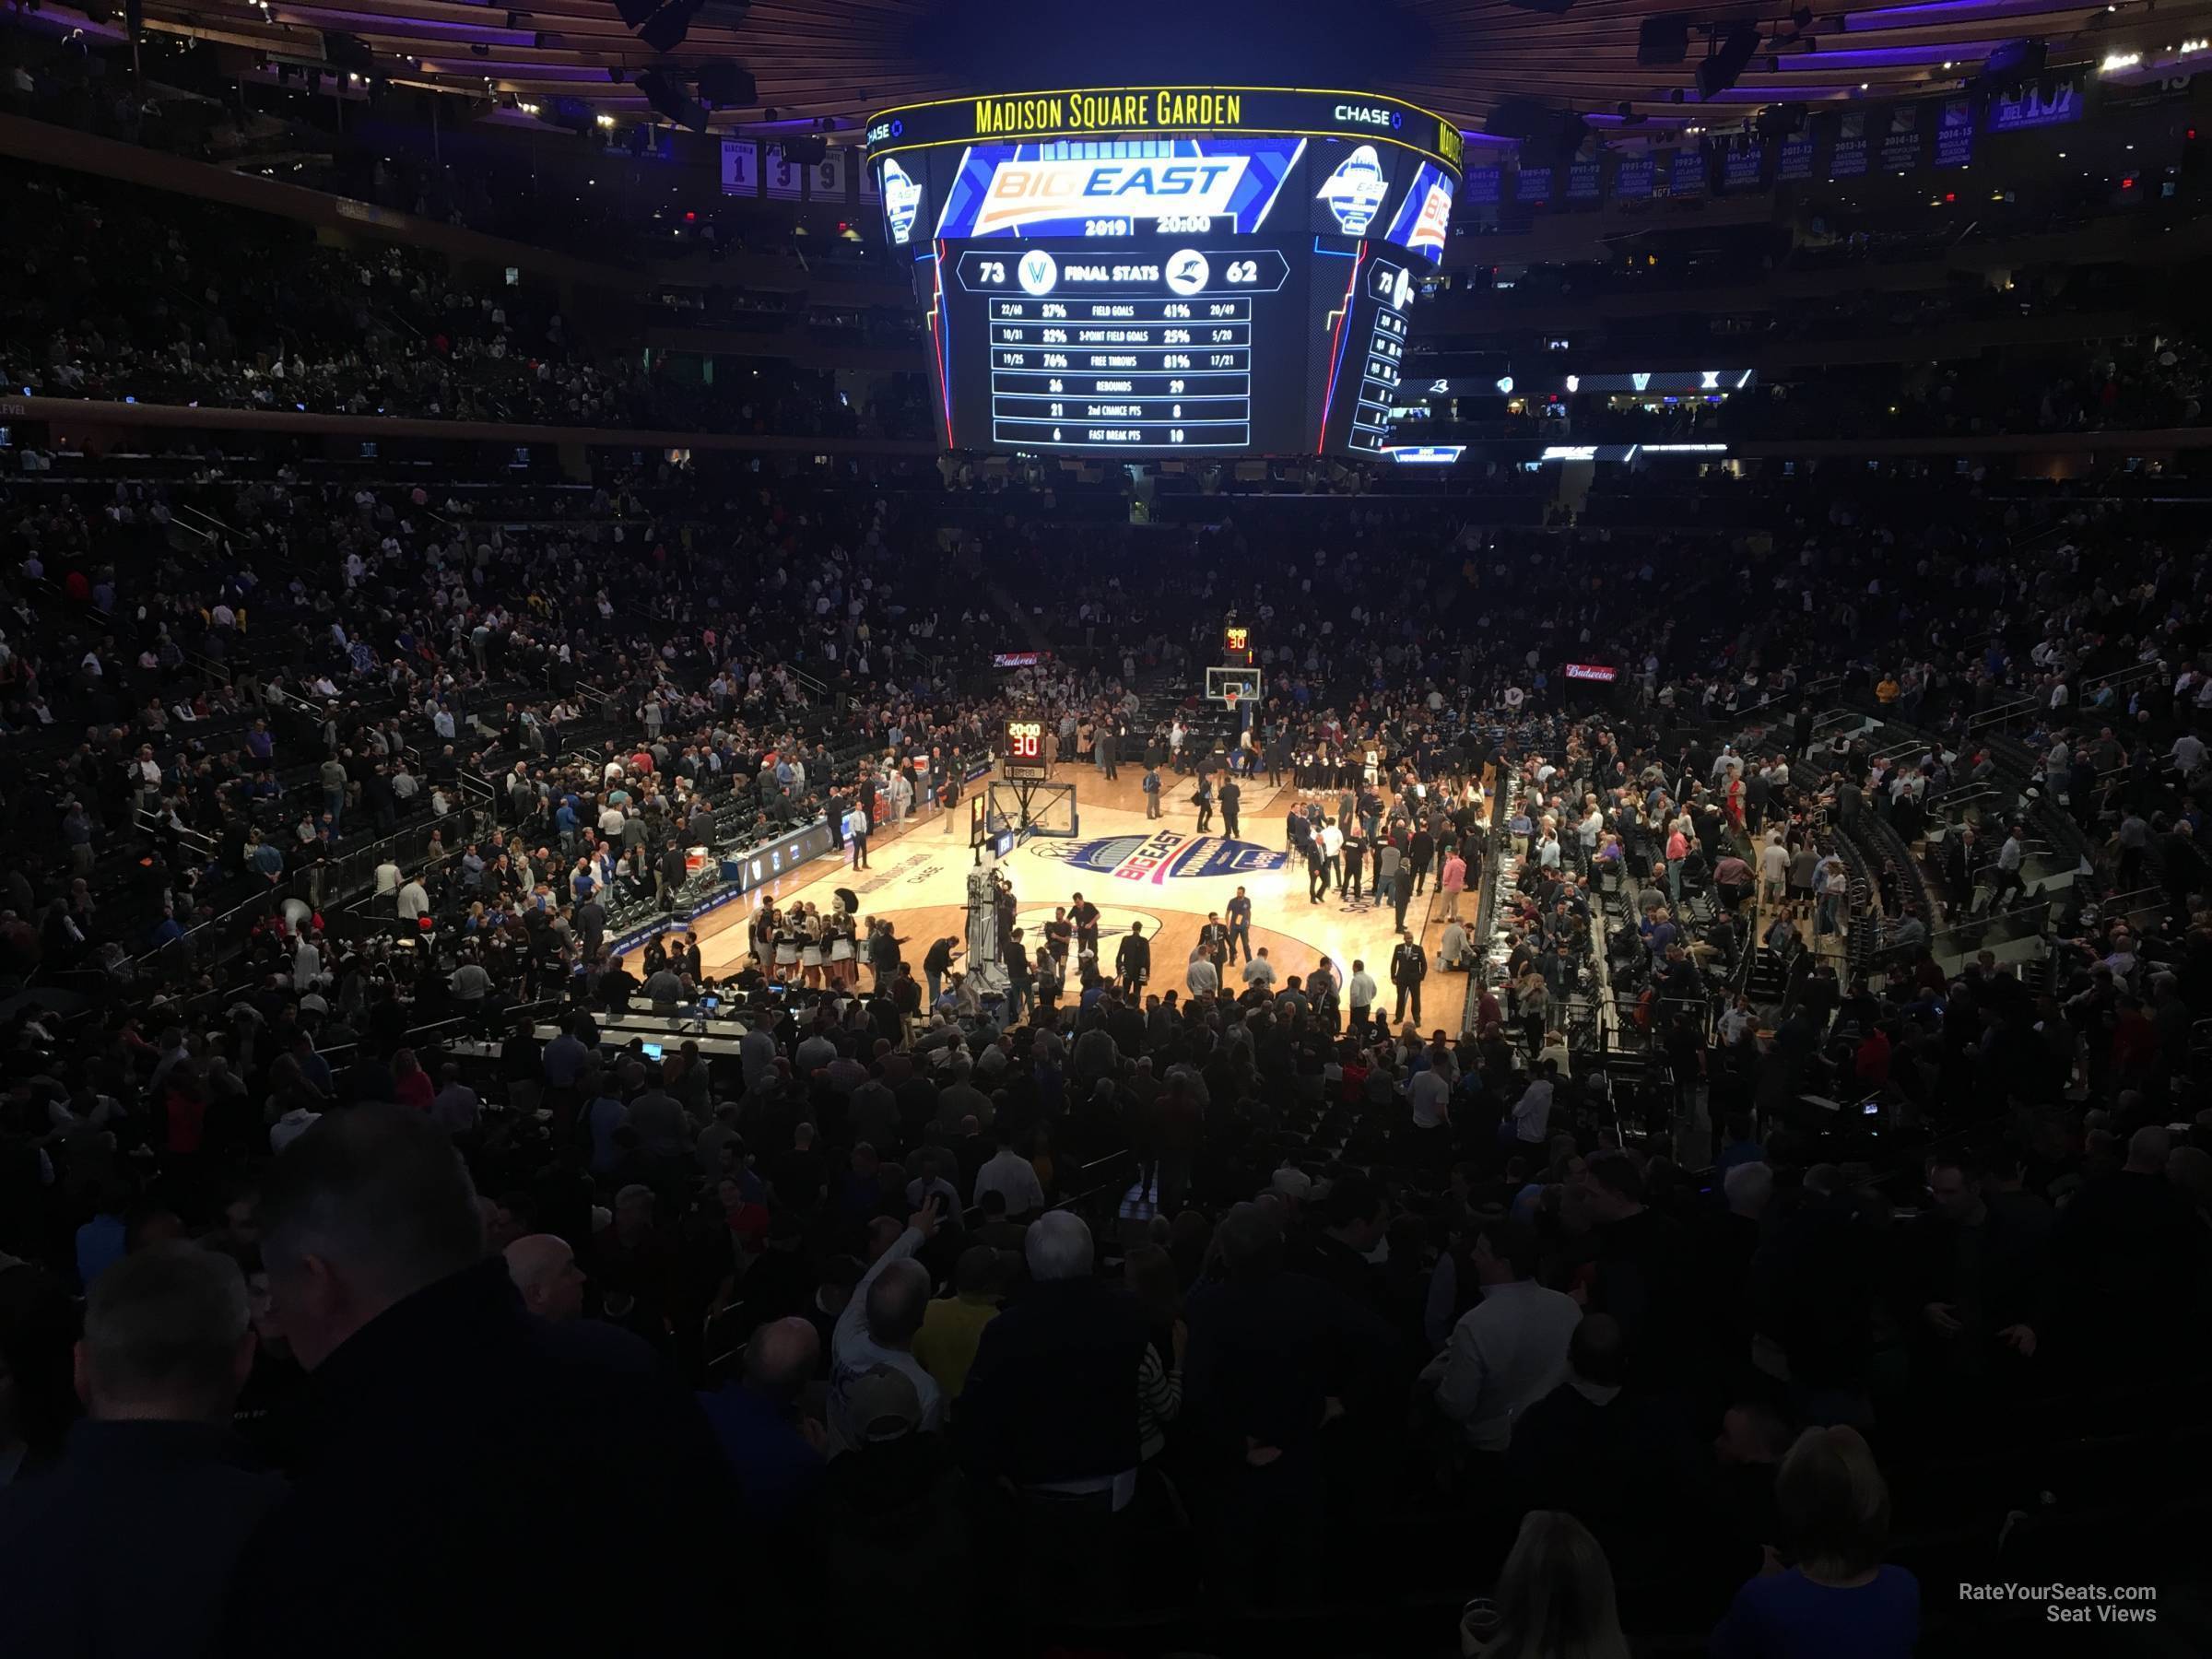 madison club 64, row 1 seat view  for basketball - madison square garden